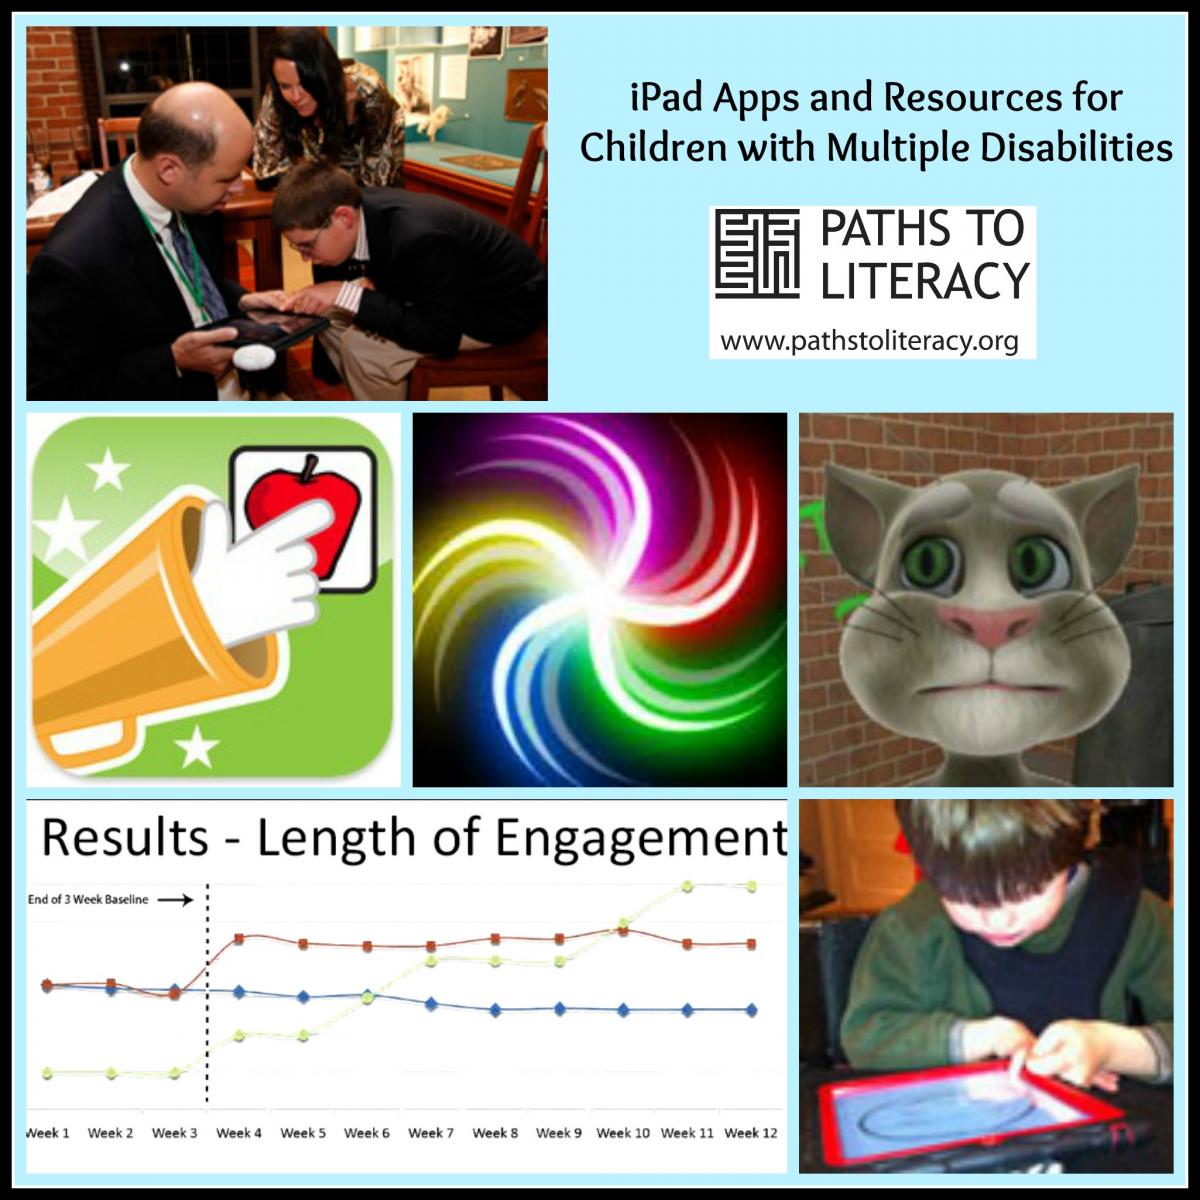 iPad Apps and Resources for children with multiple disabilities